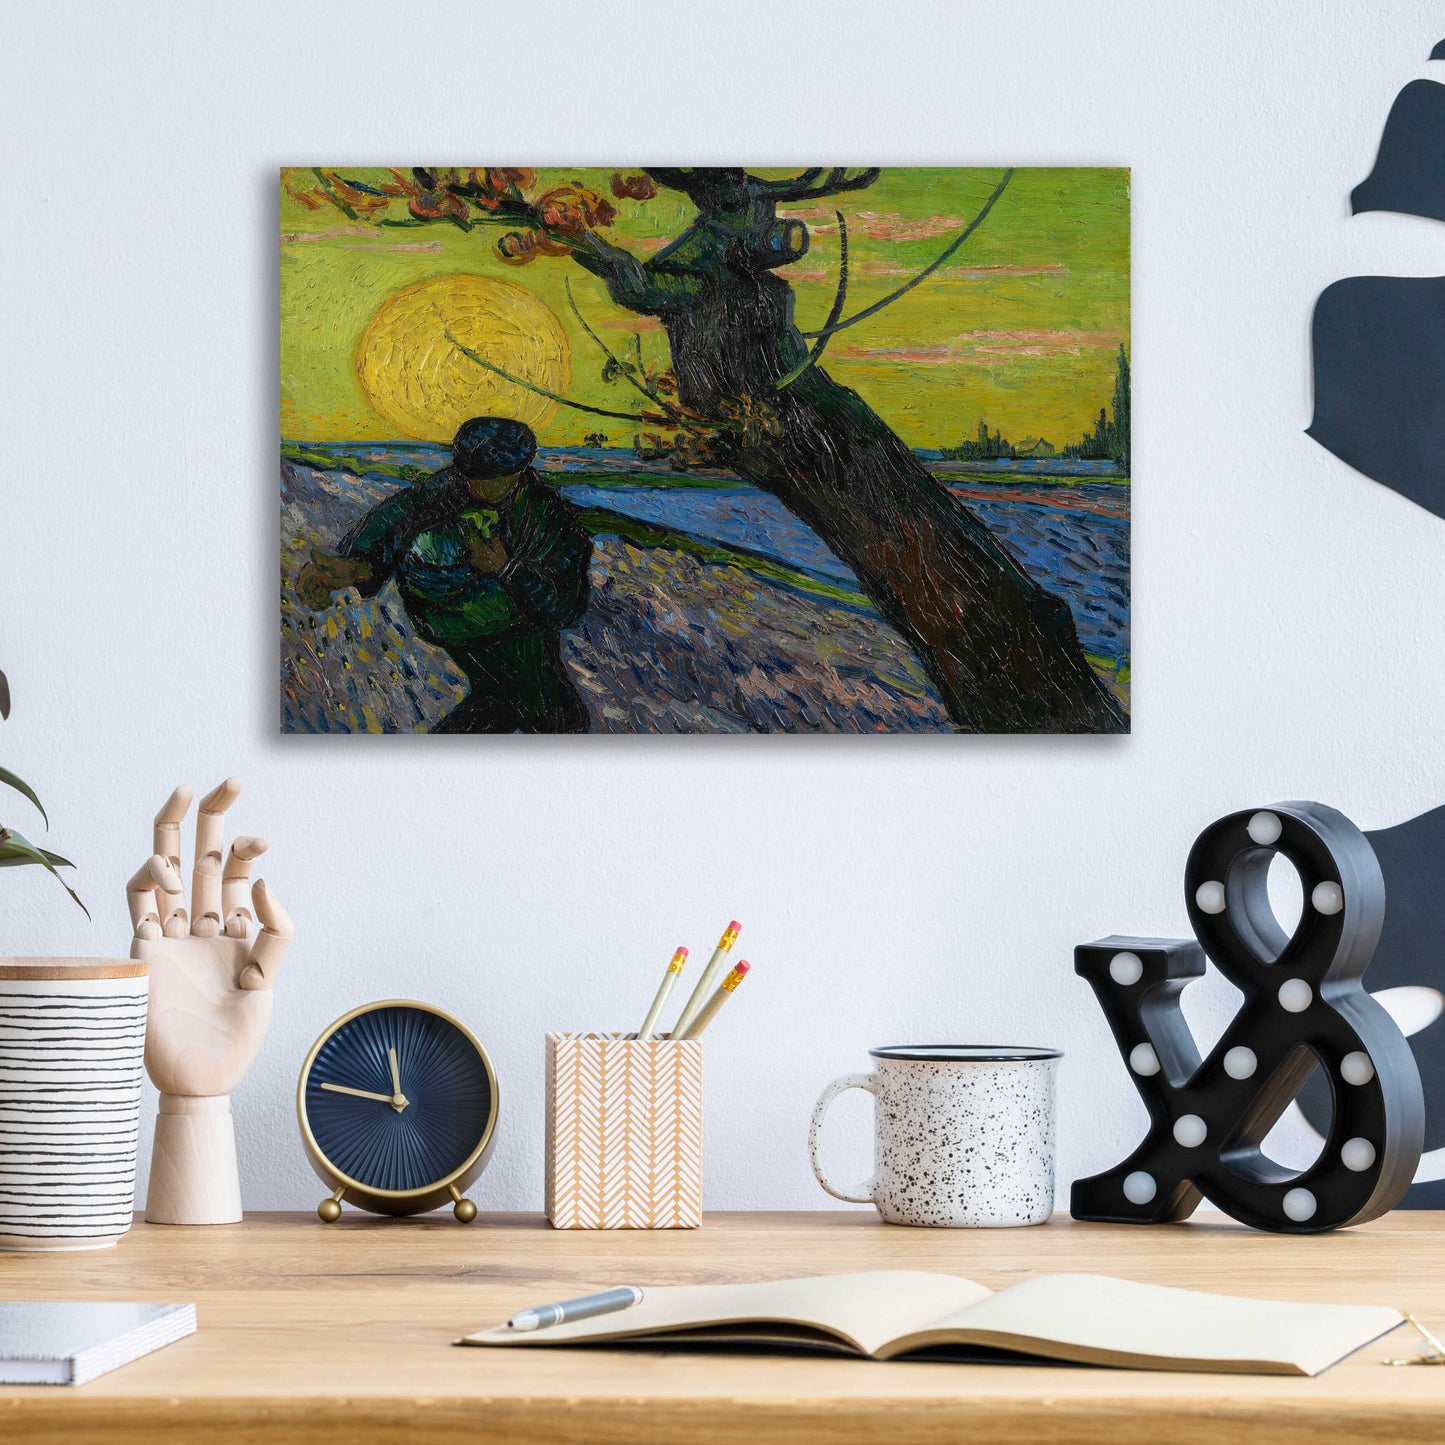 Epic Art 'The Sower' by Vincent Van Gogh, Acrylic Glass Wall Art,16x12